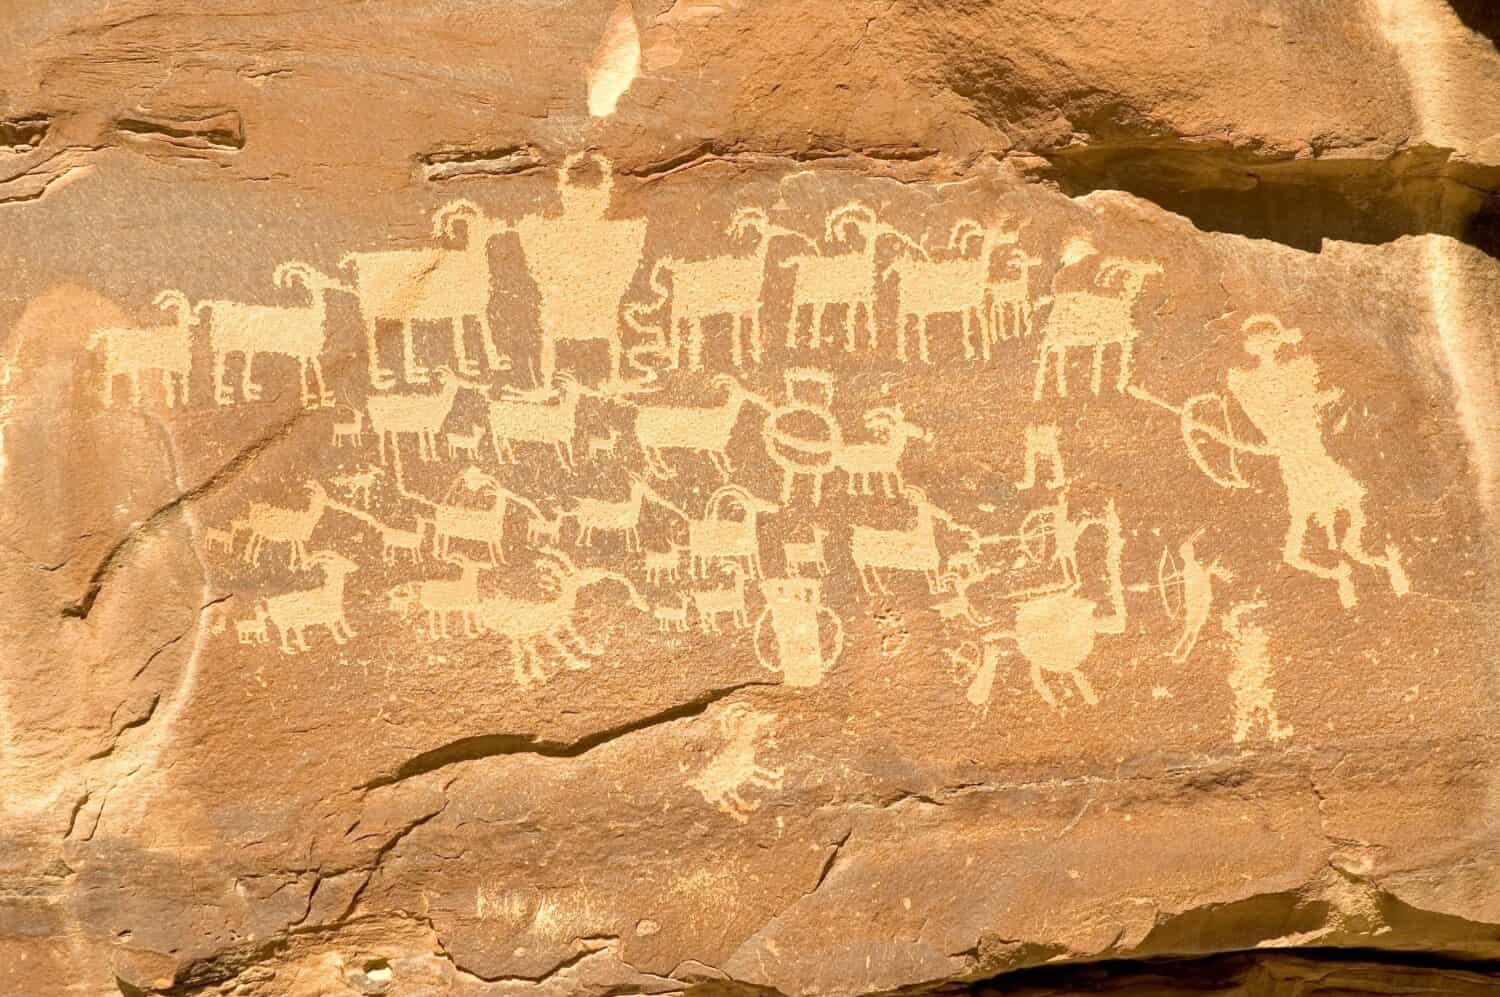 Fremont Indian hieroglyph in Nine Mile Canyon (near Price, Utah) featuring hunters with bows and arrows, a horned shamanic figure, and a shield figure in the middle of the bighorn sheep.